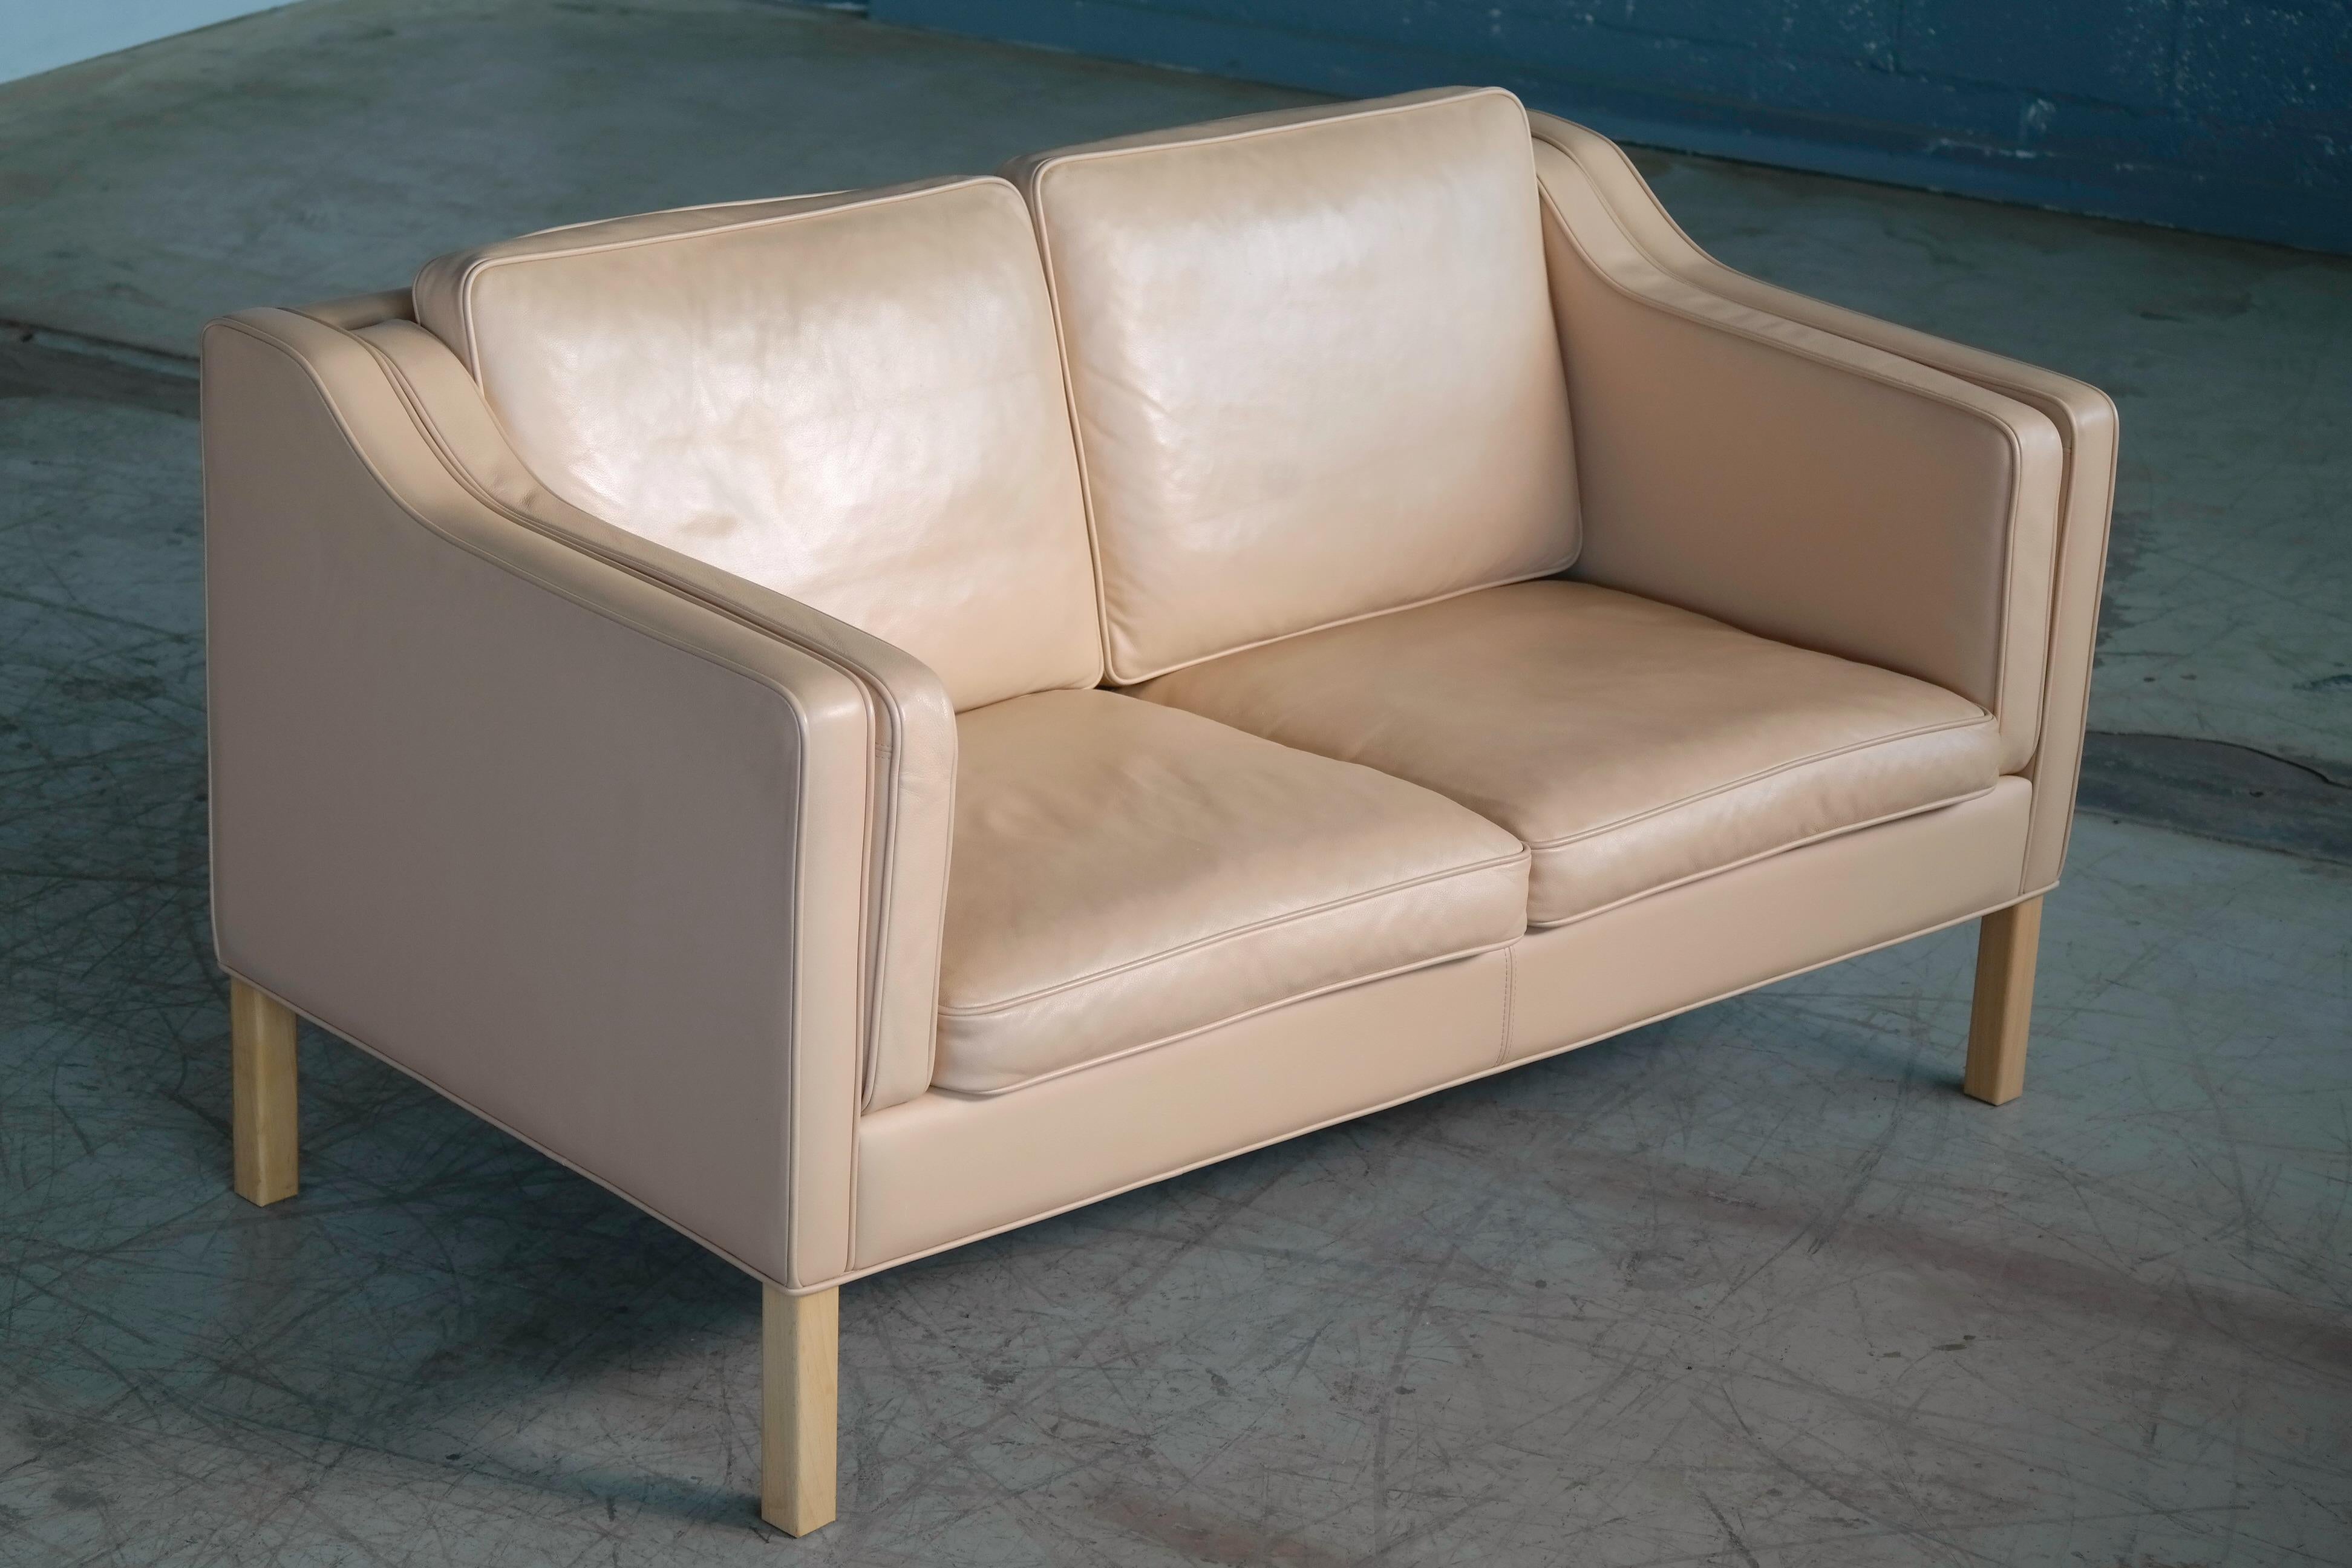 Classic Danish sofa set (3+2) in the style of Borge Mogensen's model 2212 and 2213. Executed in supple tan leather by Ryesberg Mobler raised on beech legs. Mogensen's Classic design has become a staple of modern decor as his sofas set a new standard